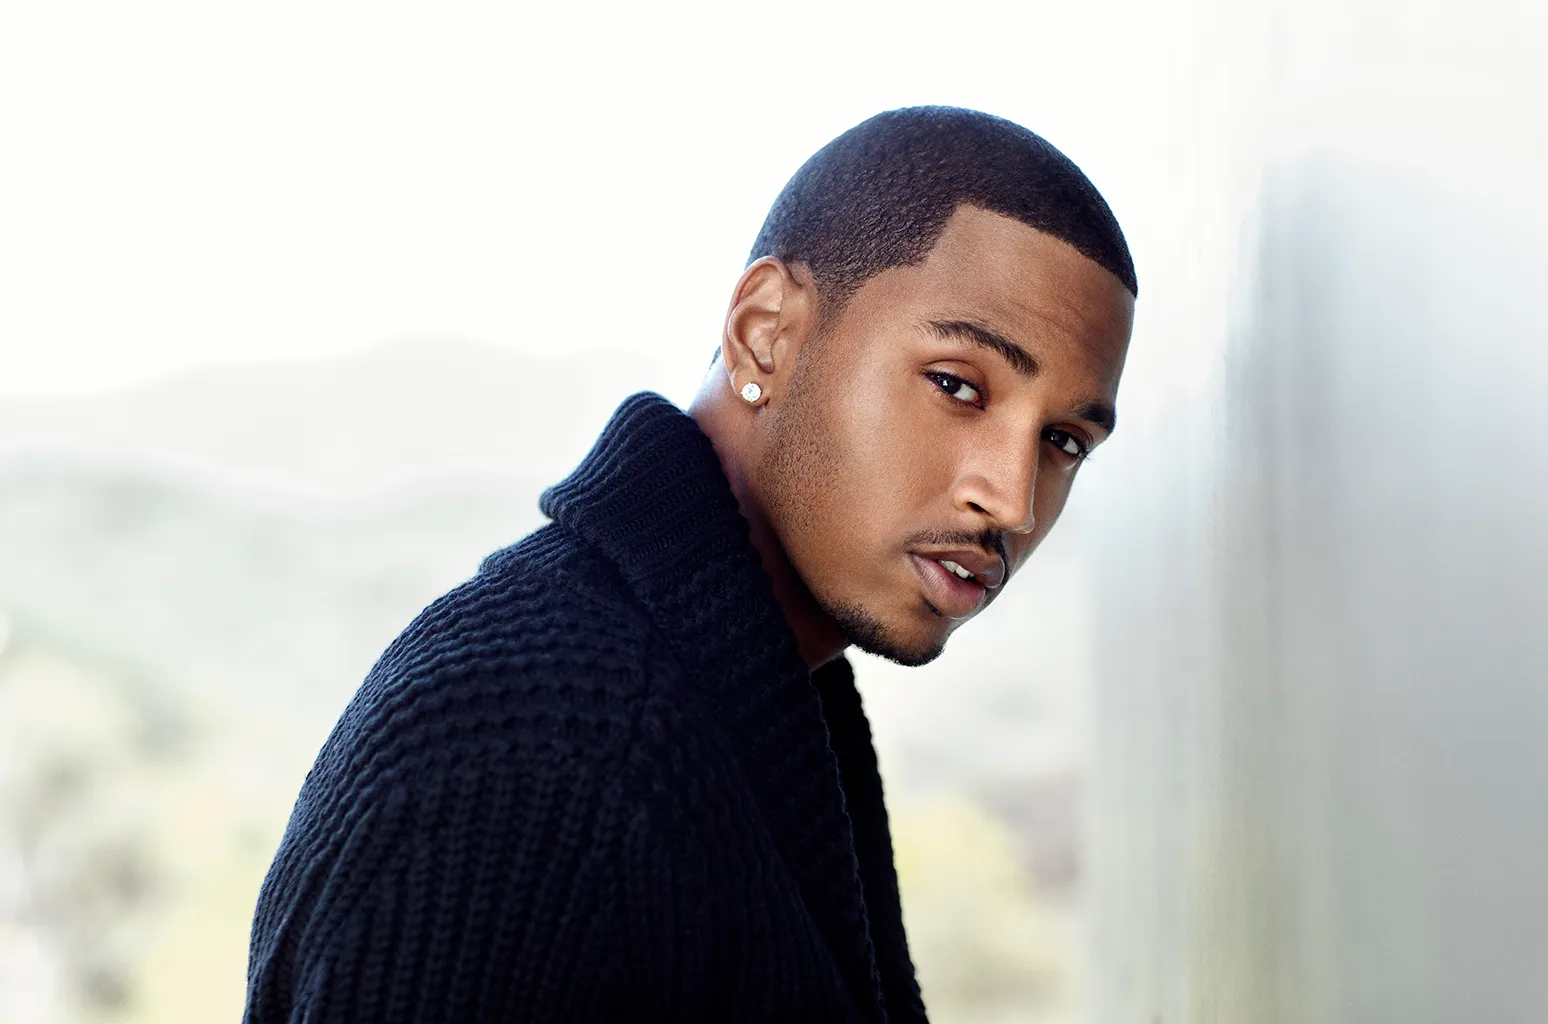 Trey Songz Under Fire For Suggestive Meet And Greet Pics Amidst Sexual Misconduct Allegations